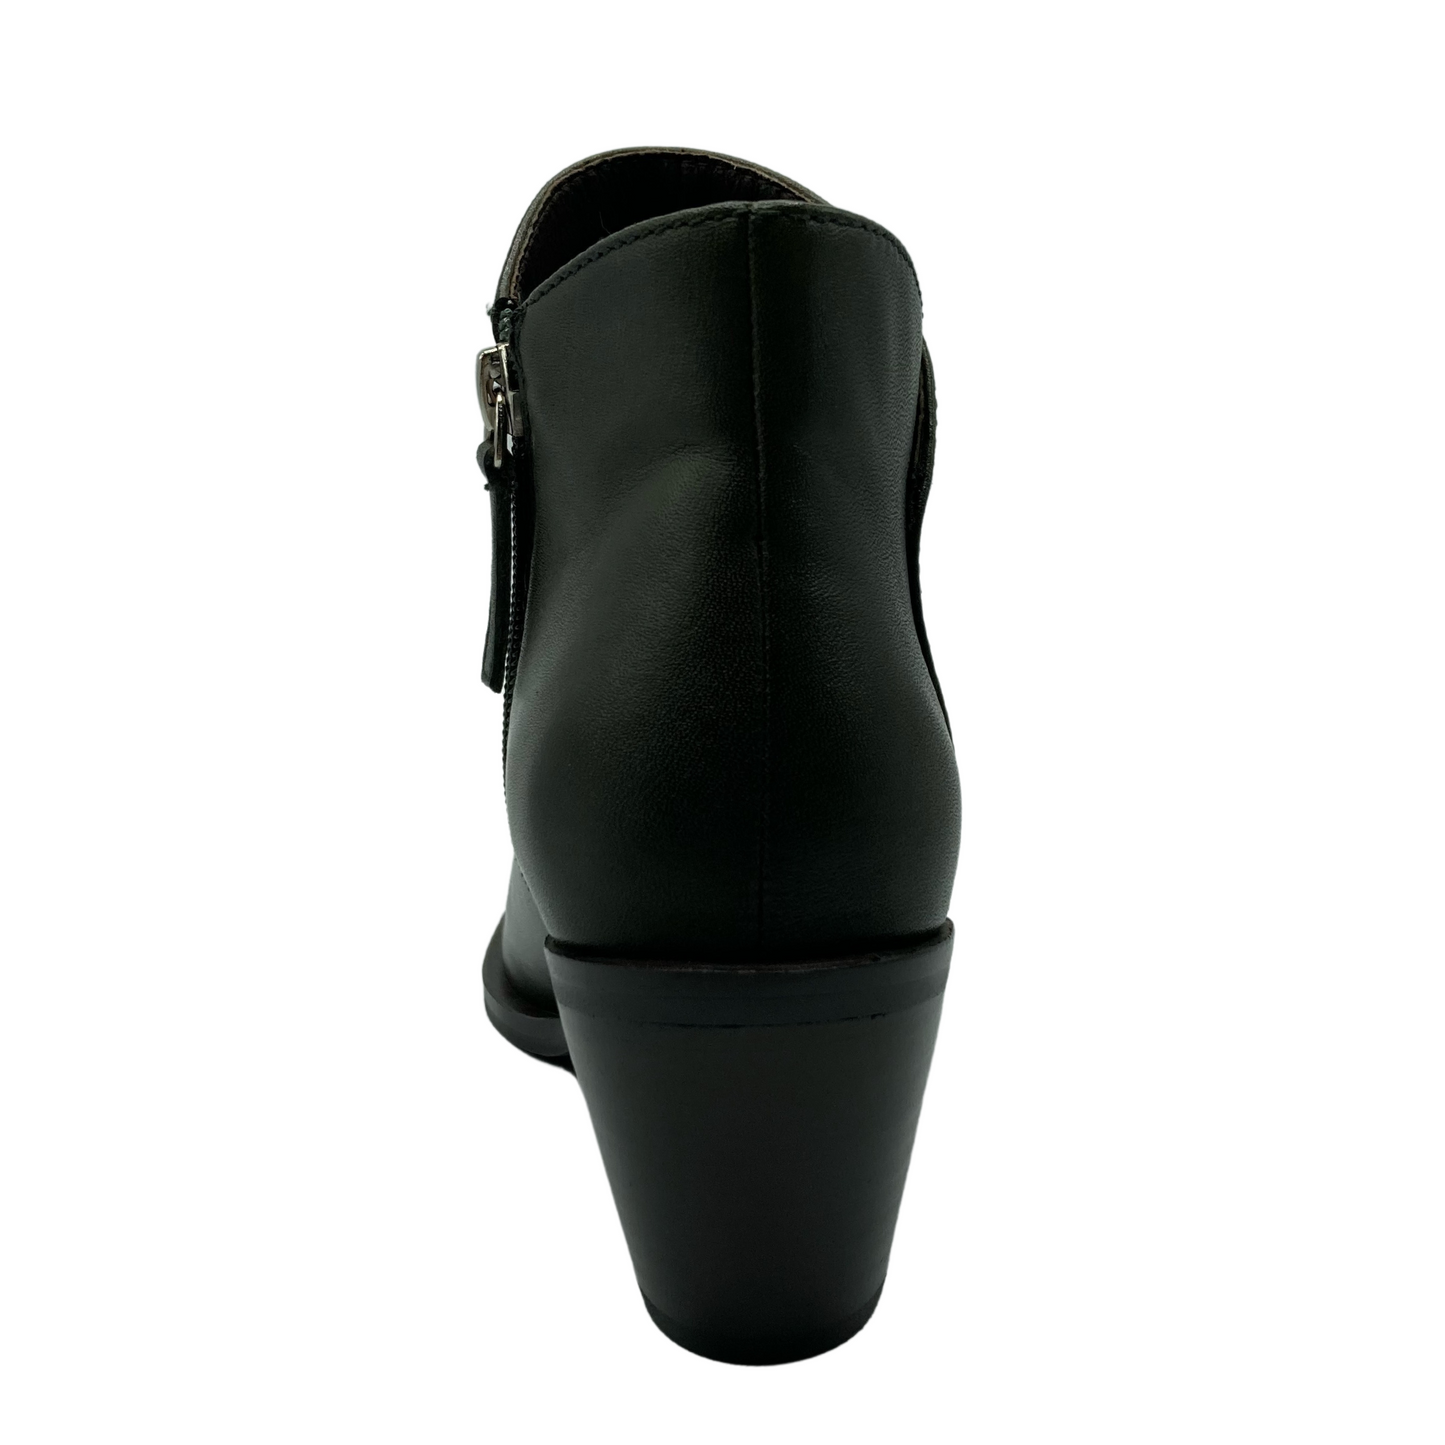 Back view of dark leather short boot with chunky heel and inner ankle zipper